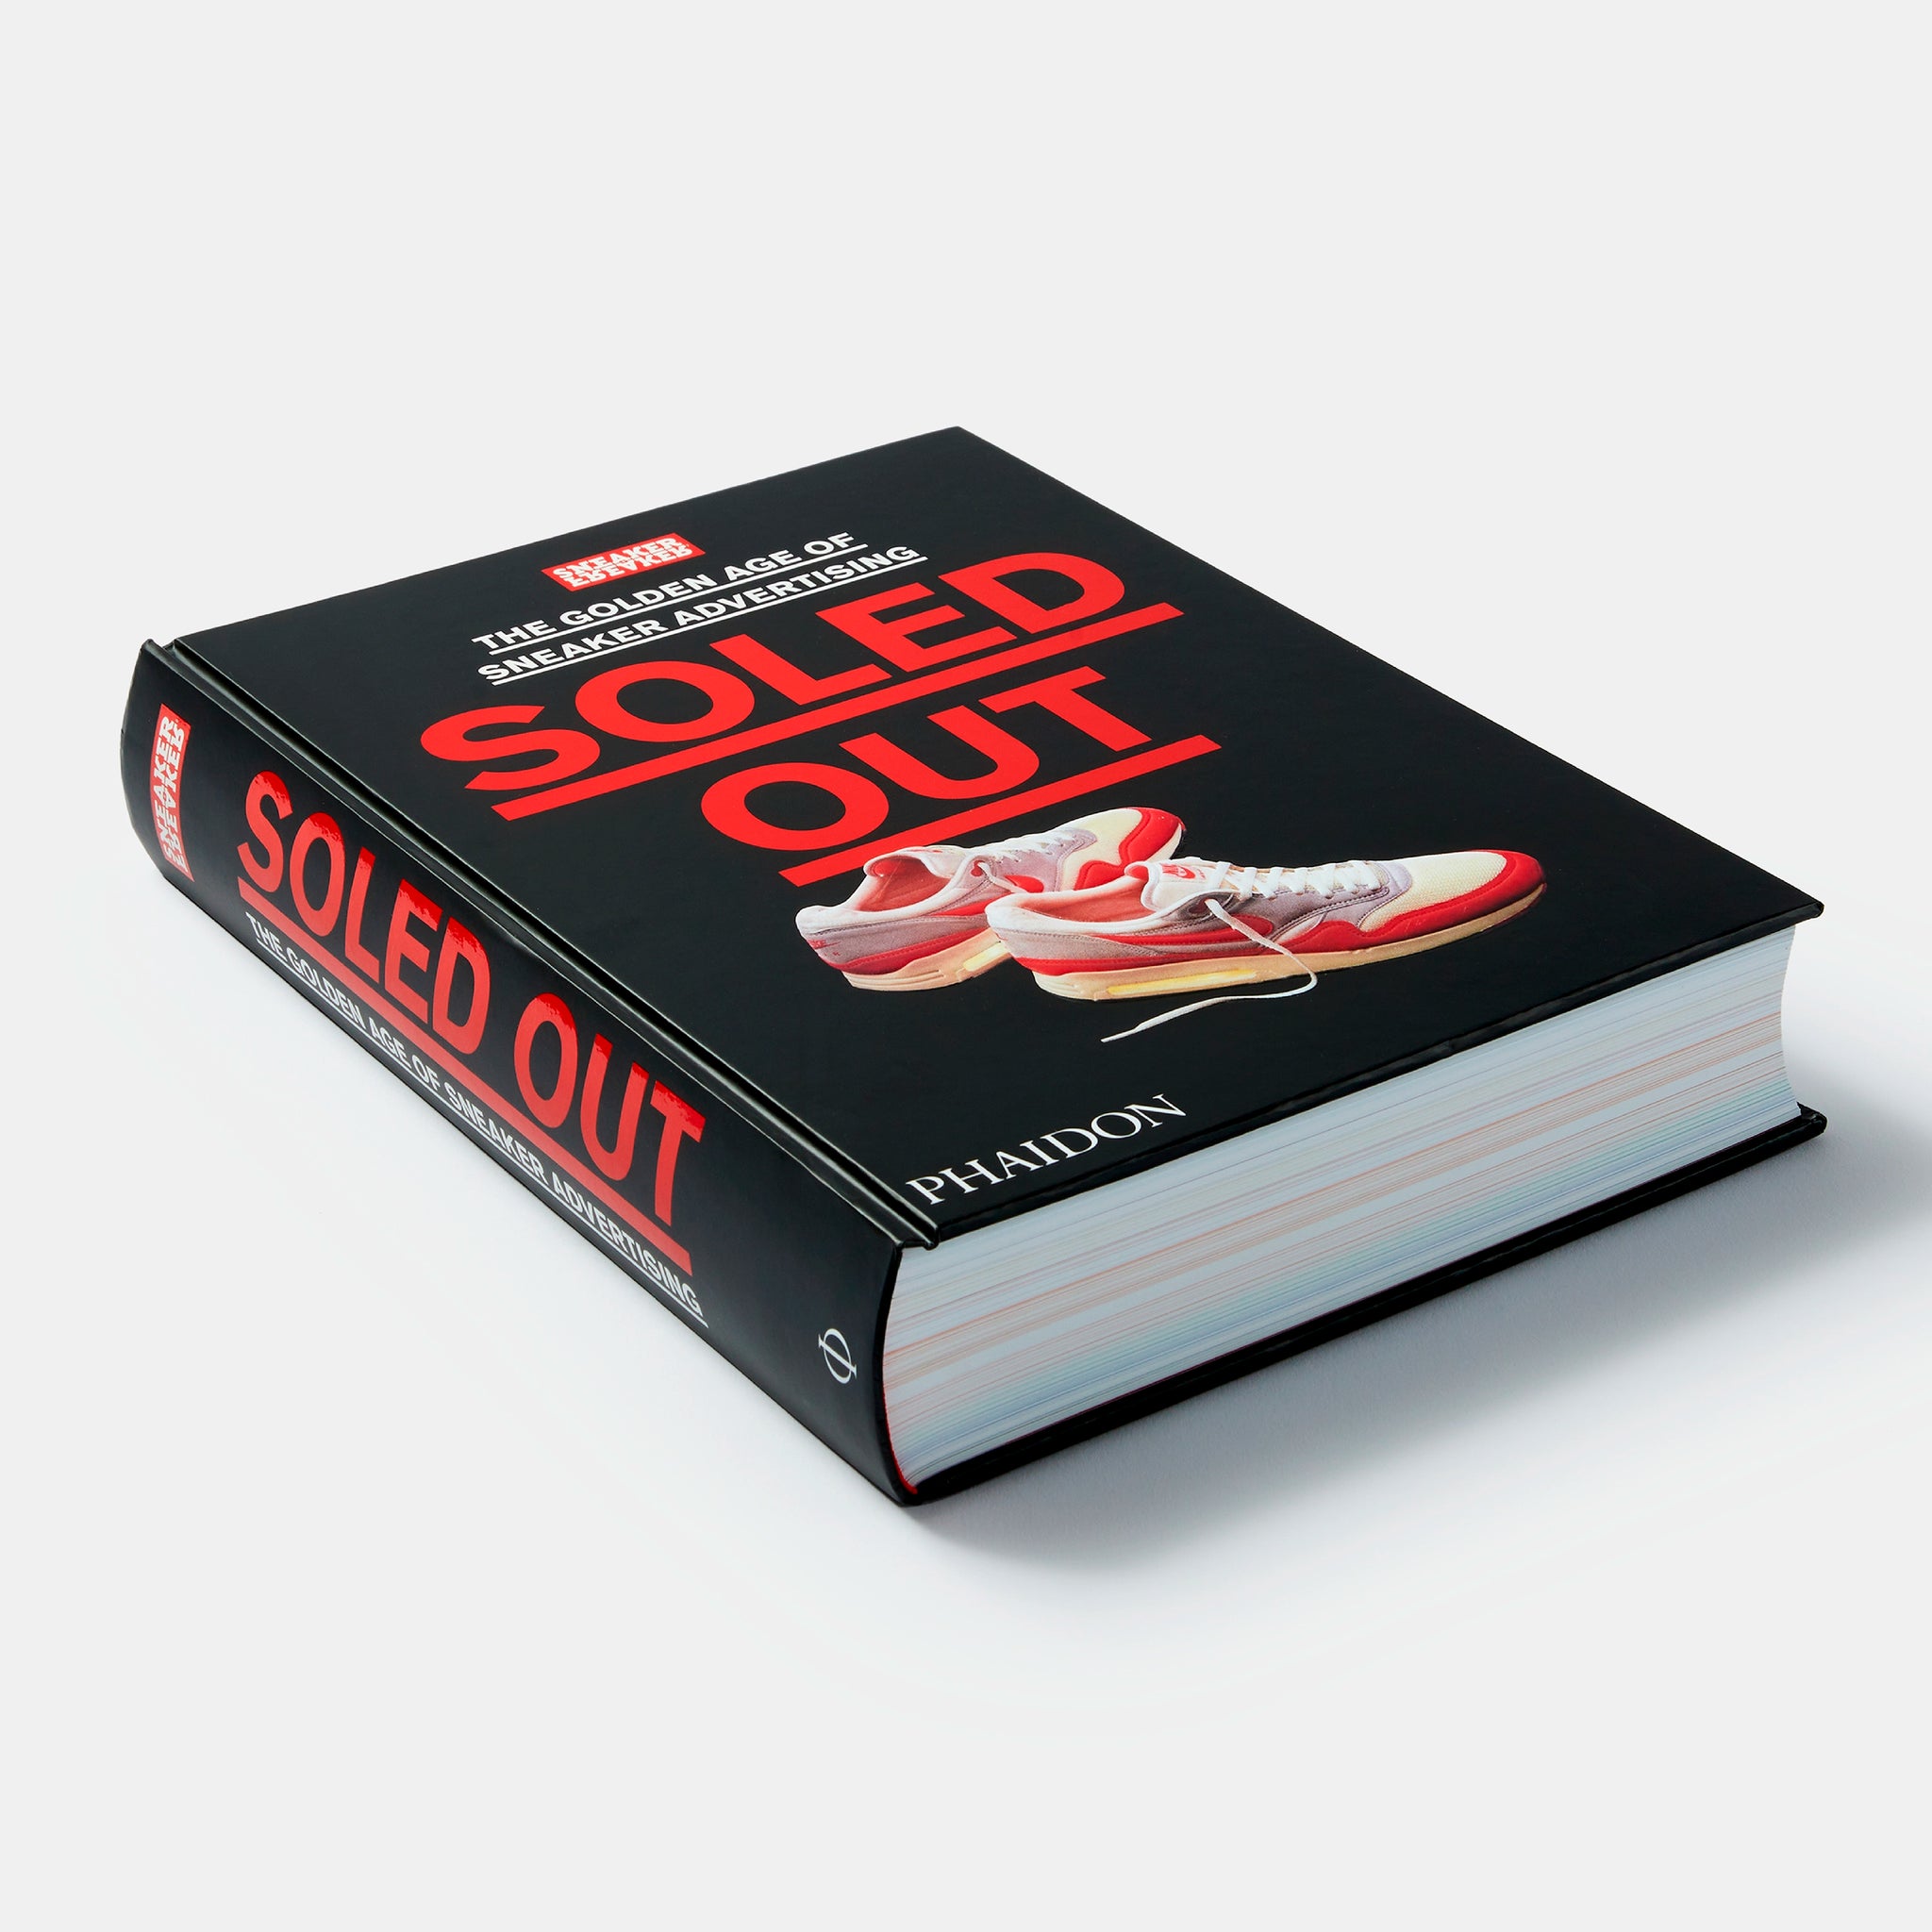 PHAIDON x Soled Out: The Golden Age of Sneaker Advertising Sneaker Freaker